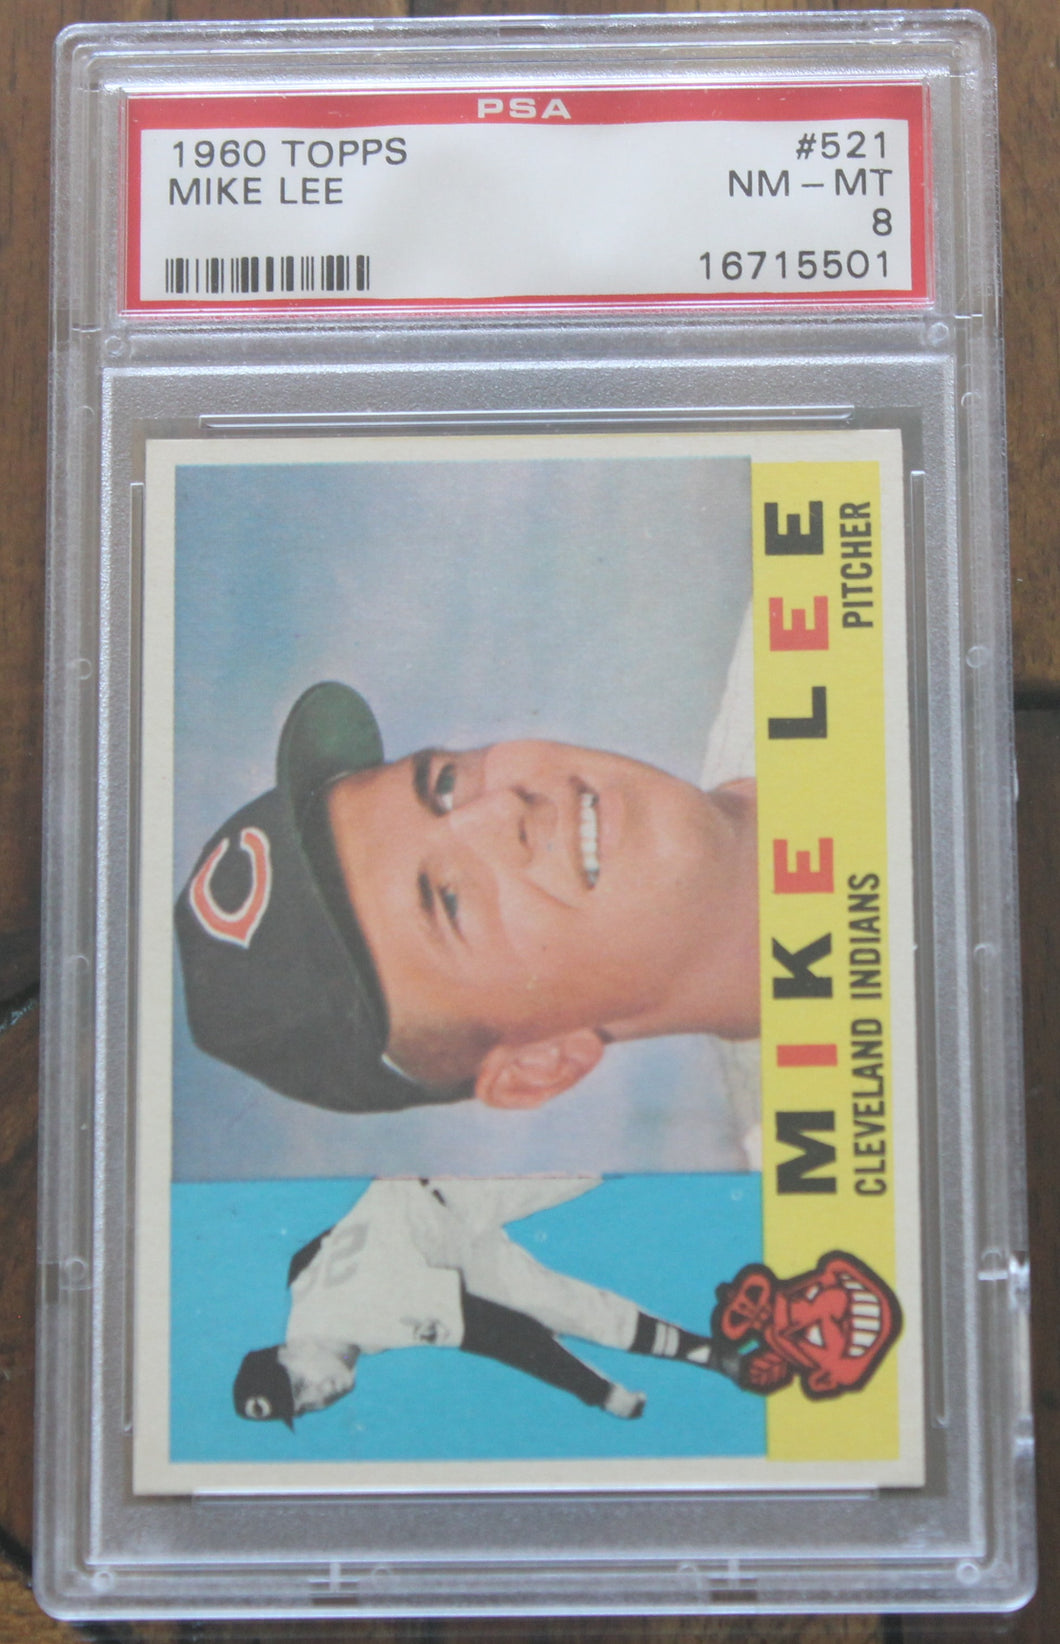 1960 Topps Mike Lee #521 PSA NM-MT 8